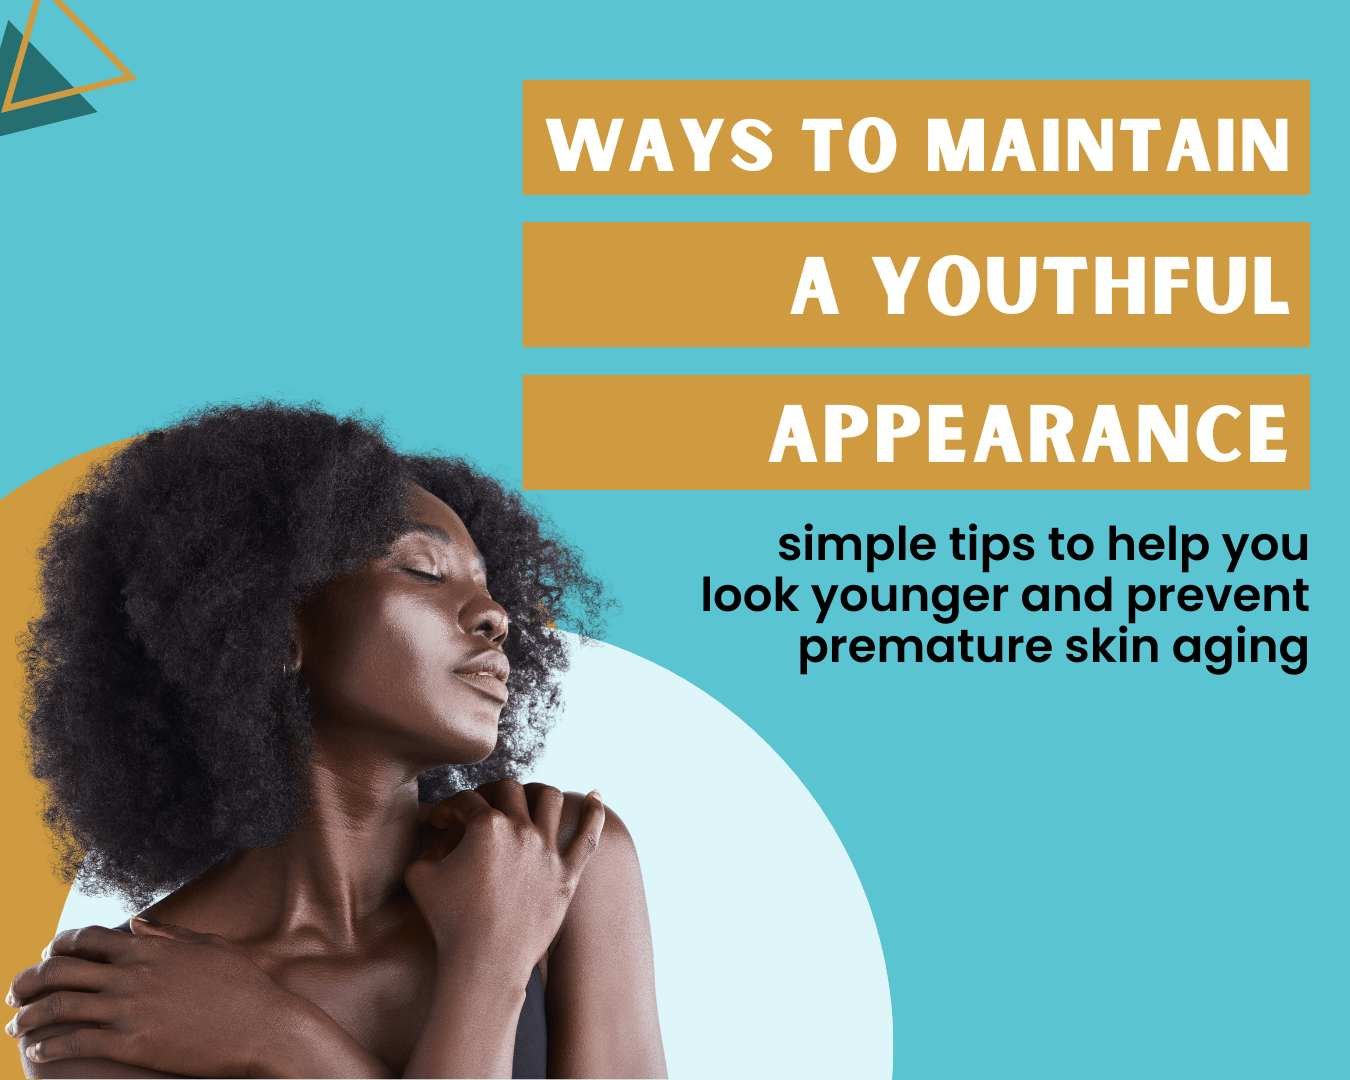 11 ways to maintain a youthful appearance